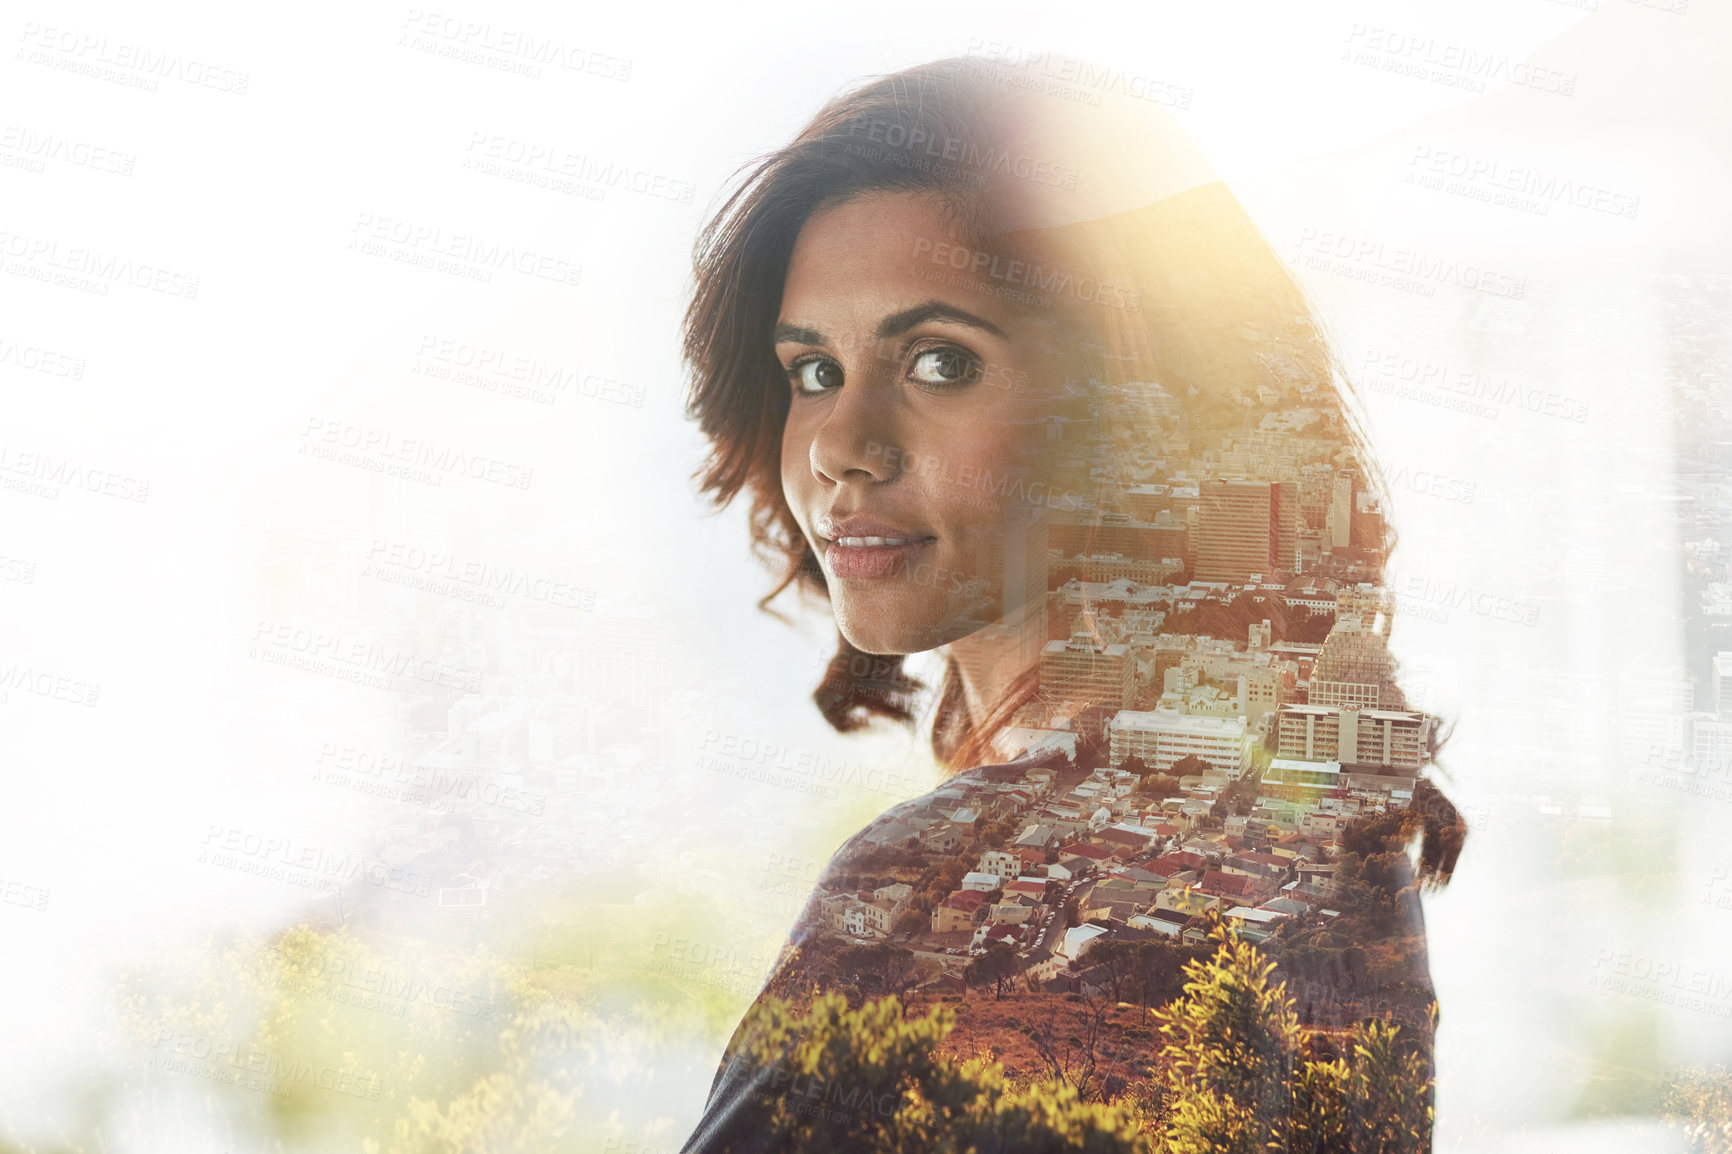 Buy stock photo Multiple exposure shot of young businesswoman superimposed over a cityscape